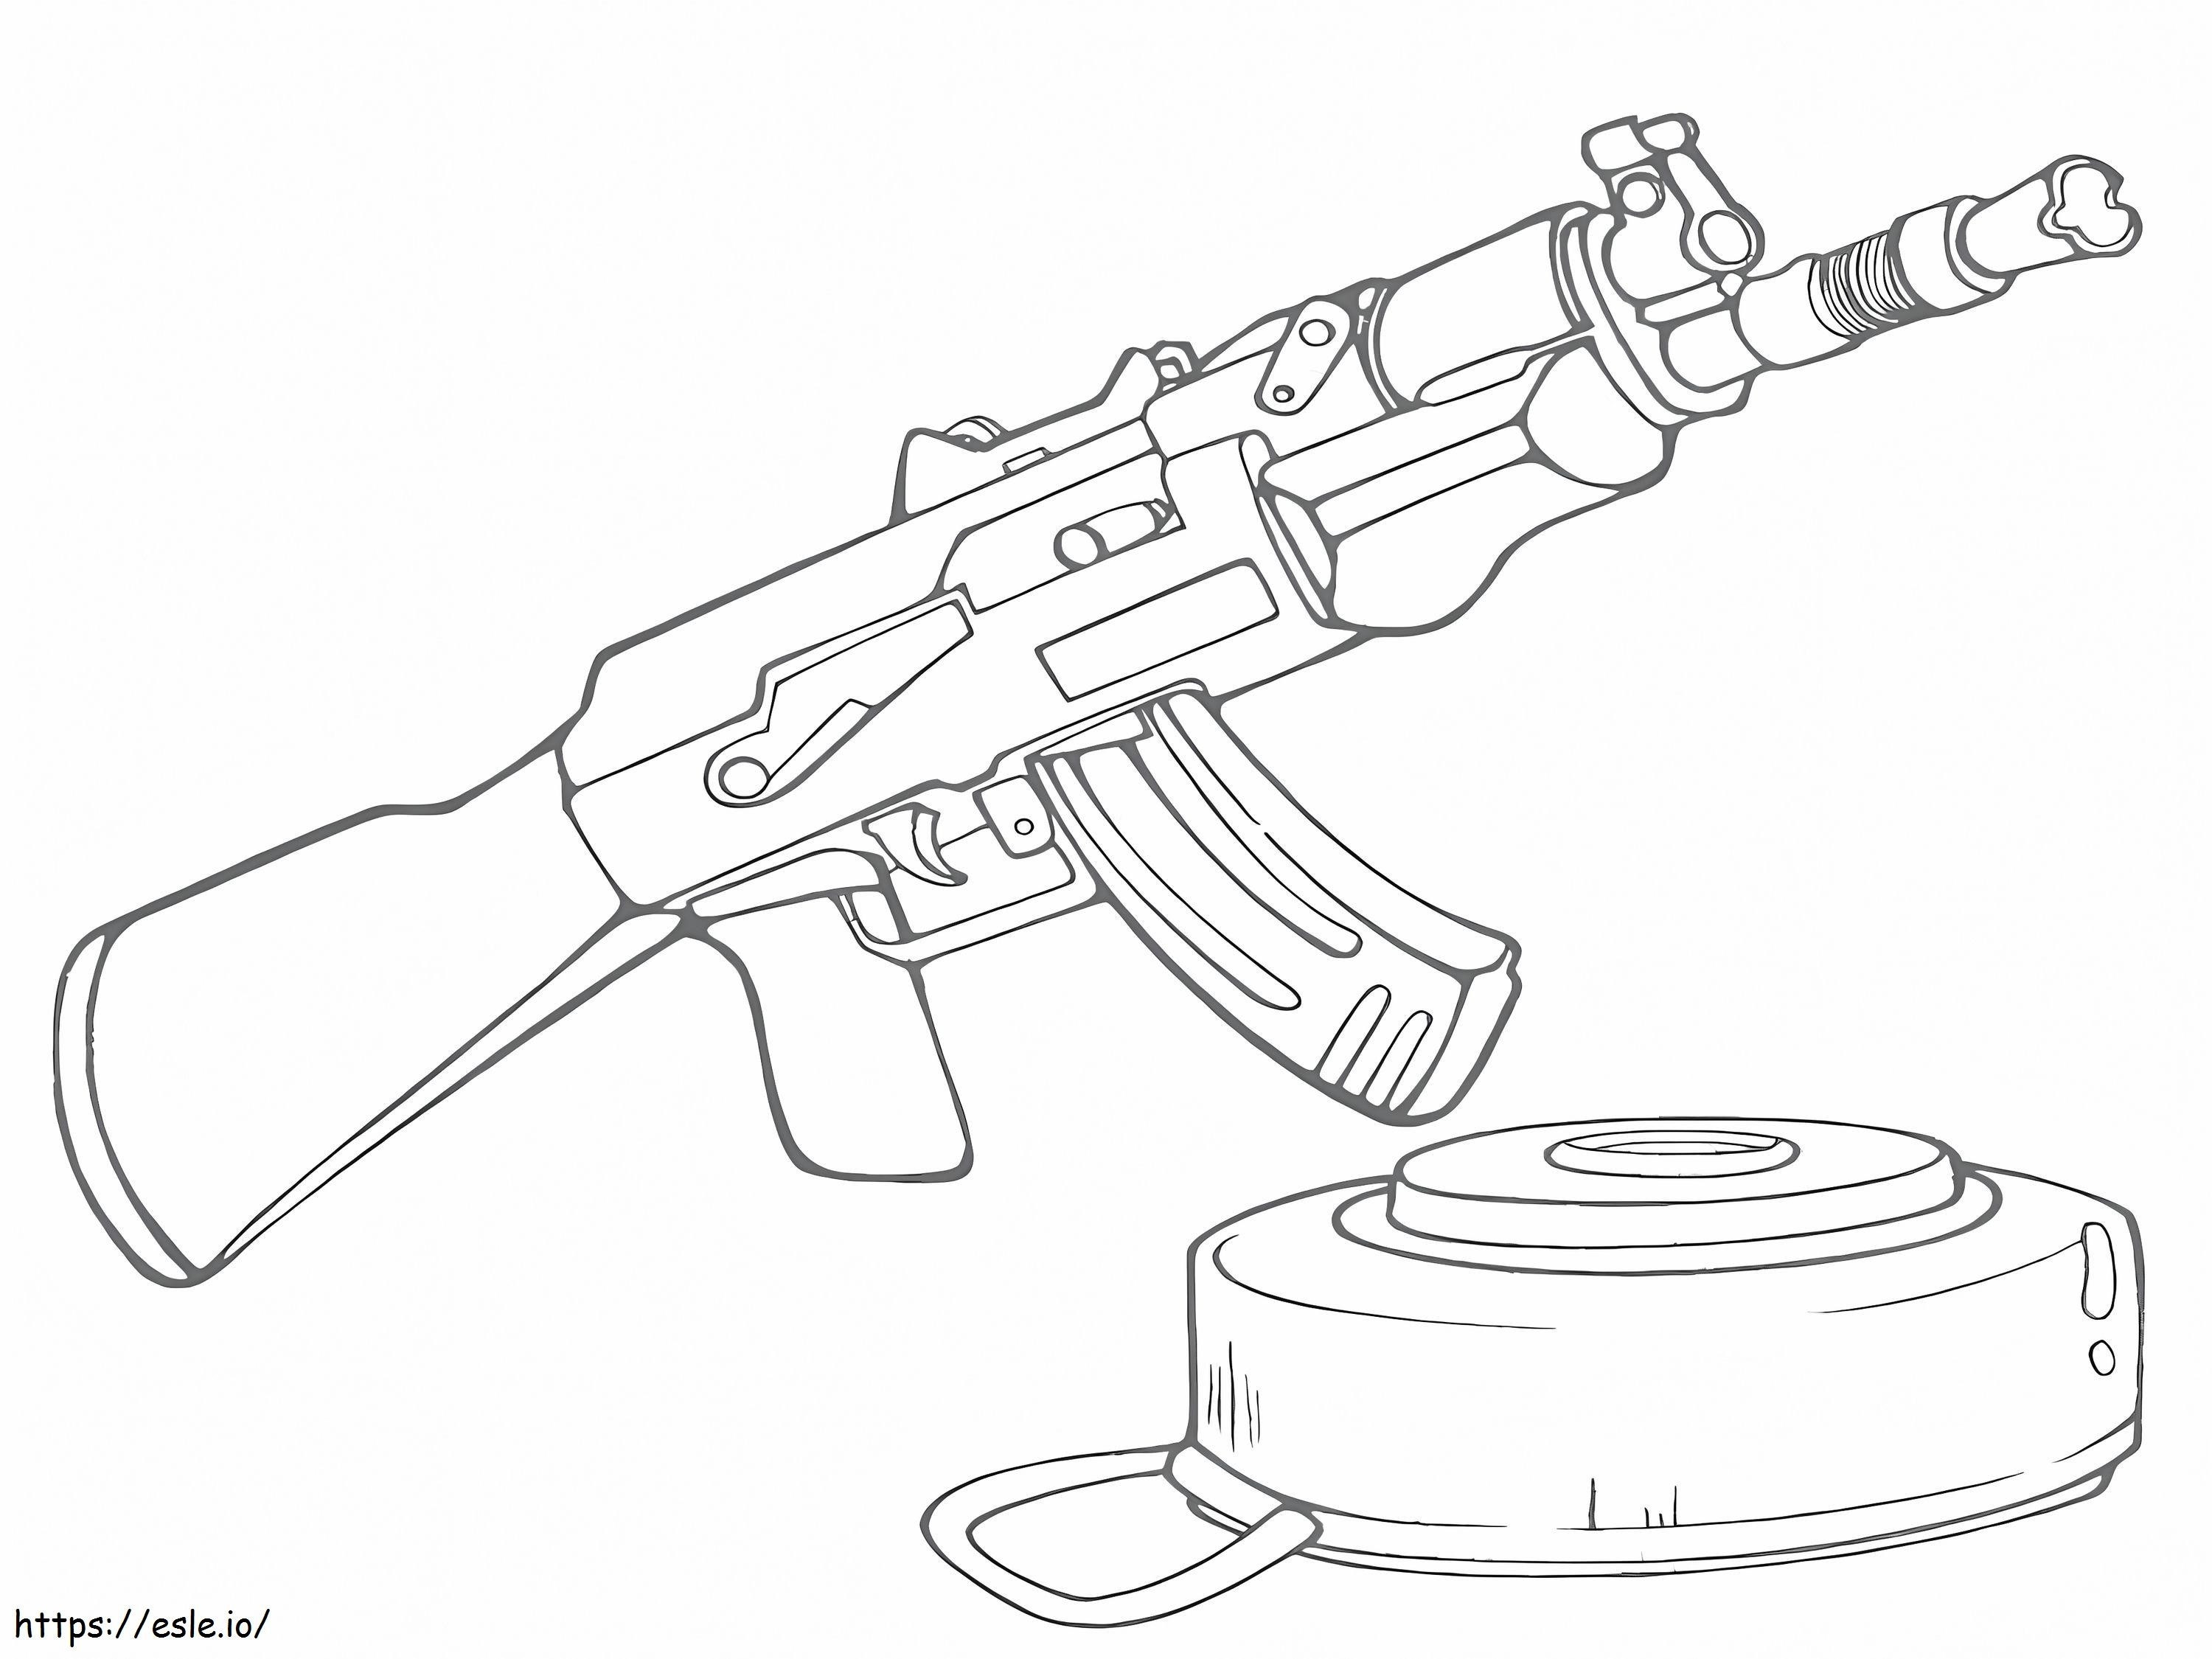 Basic Military Weapon coloring page